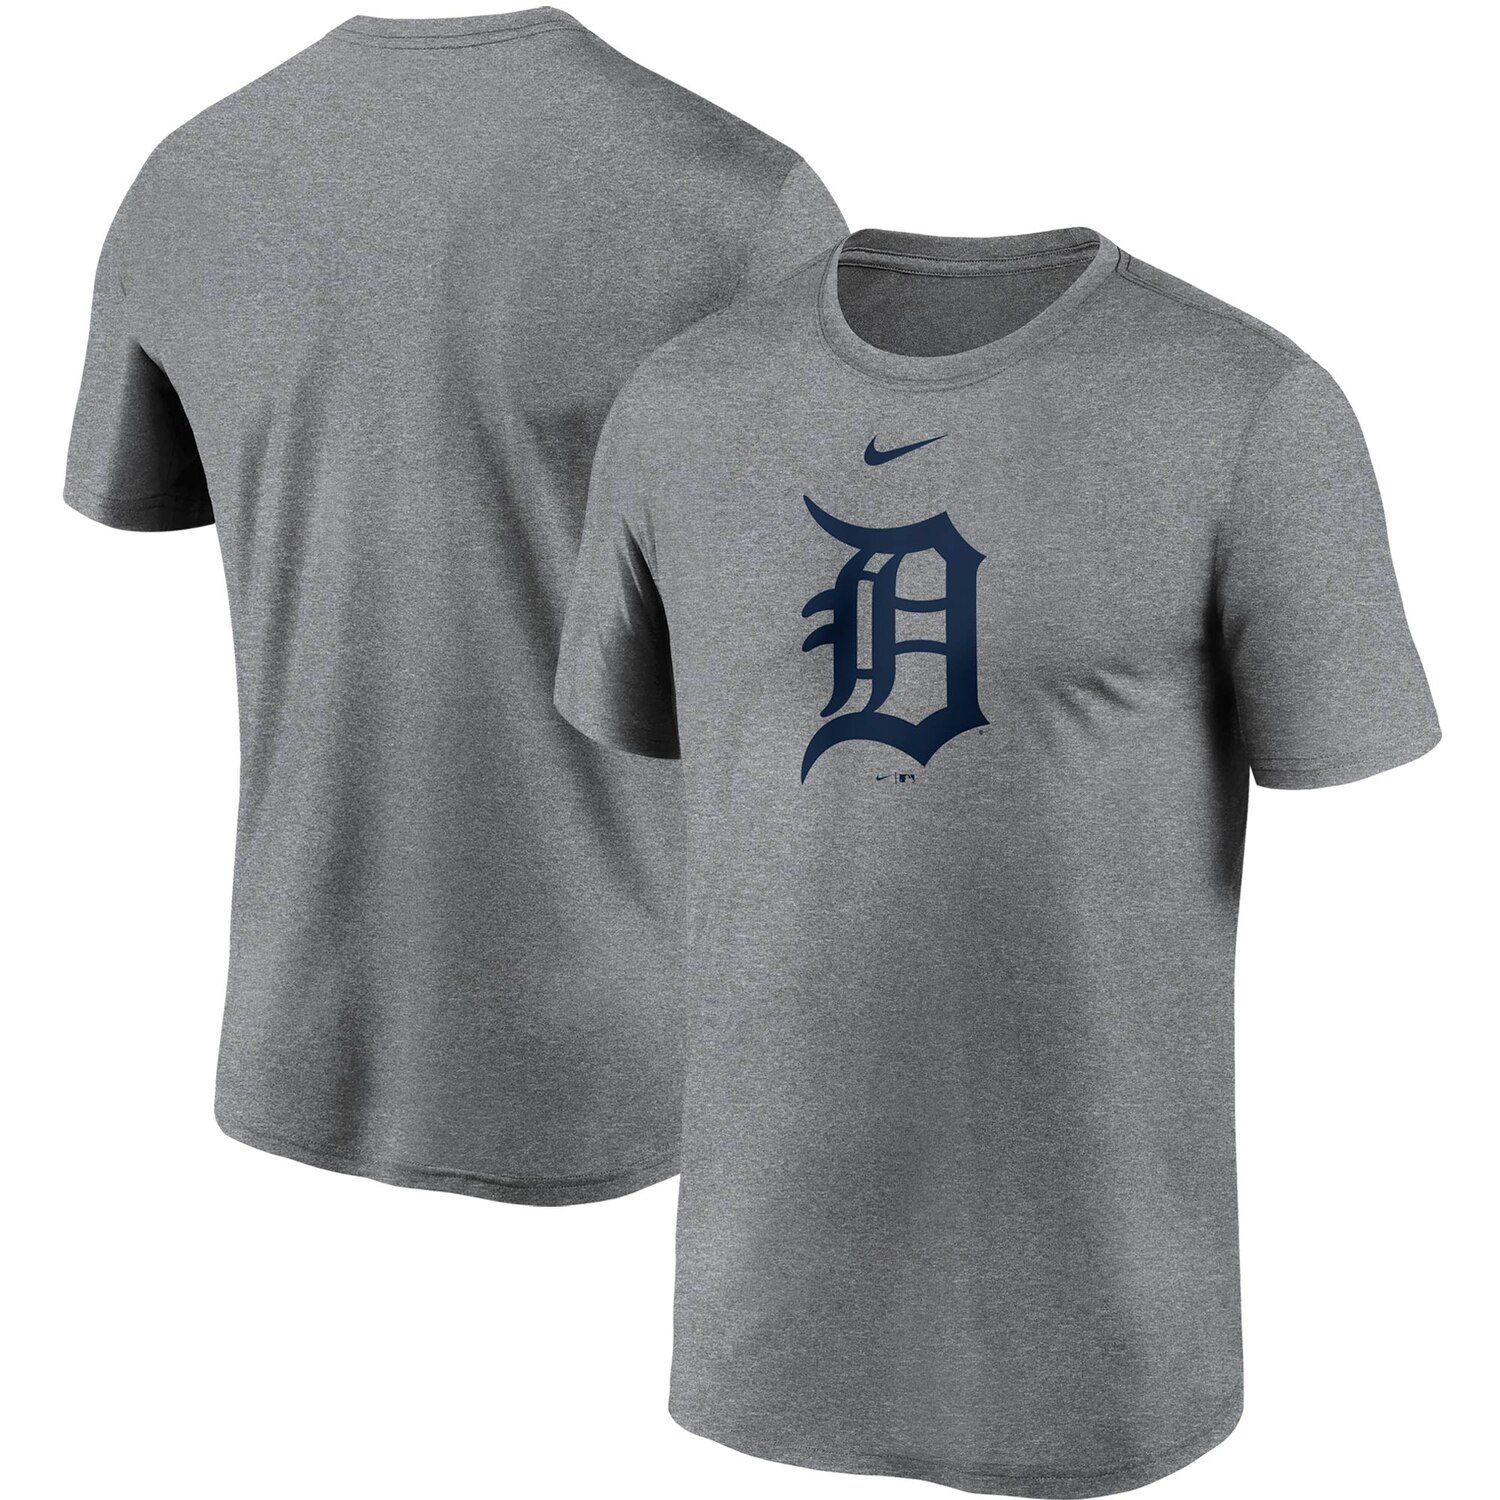 tigers shirts at meijer